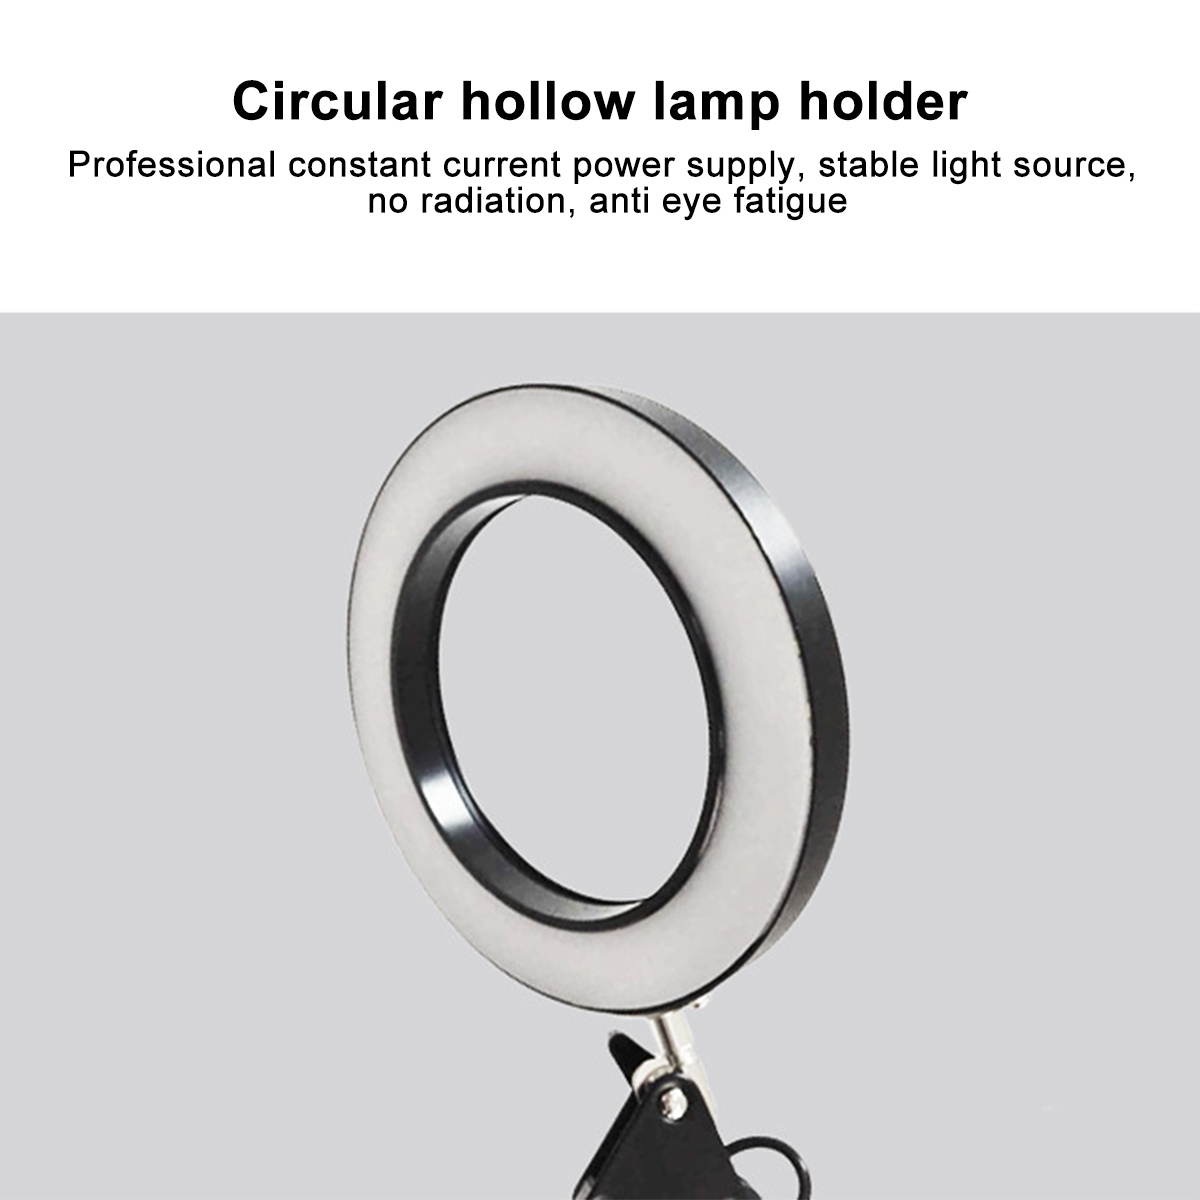 5X-Magnifying-Lamp-Clamp-Mount-LED-Magnifier-Lamp-Manicure-Tattoo-Beauty-Light-1801341-5